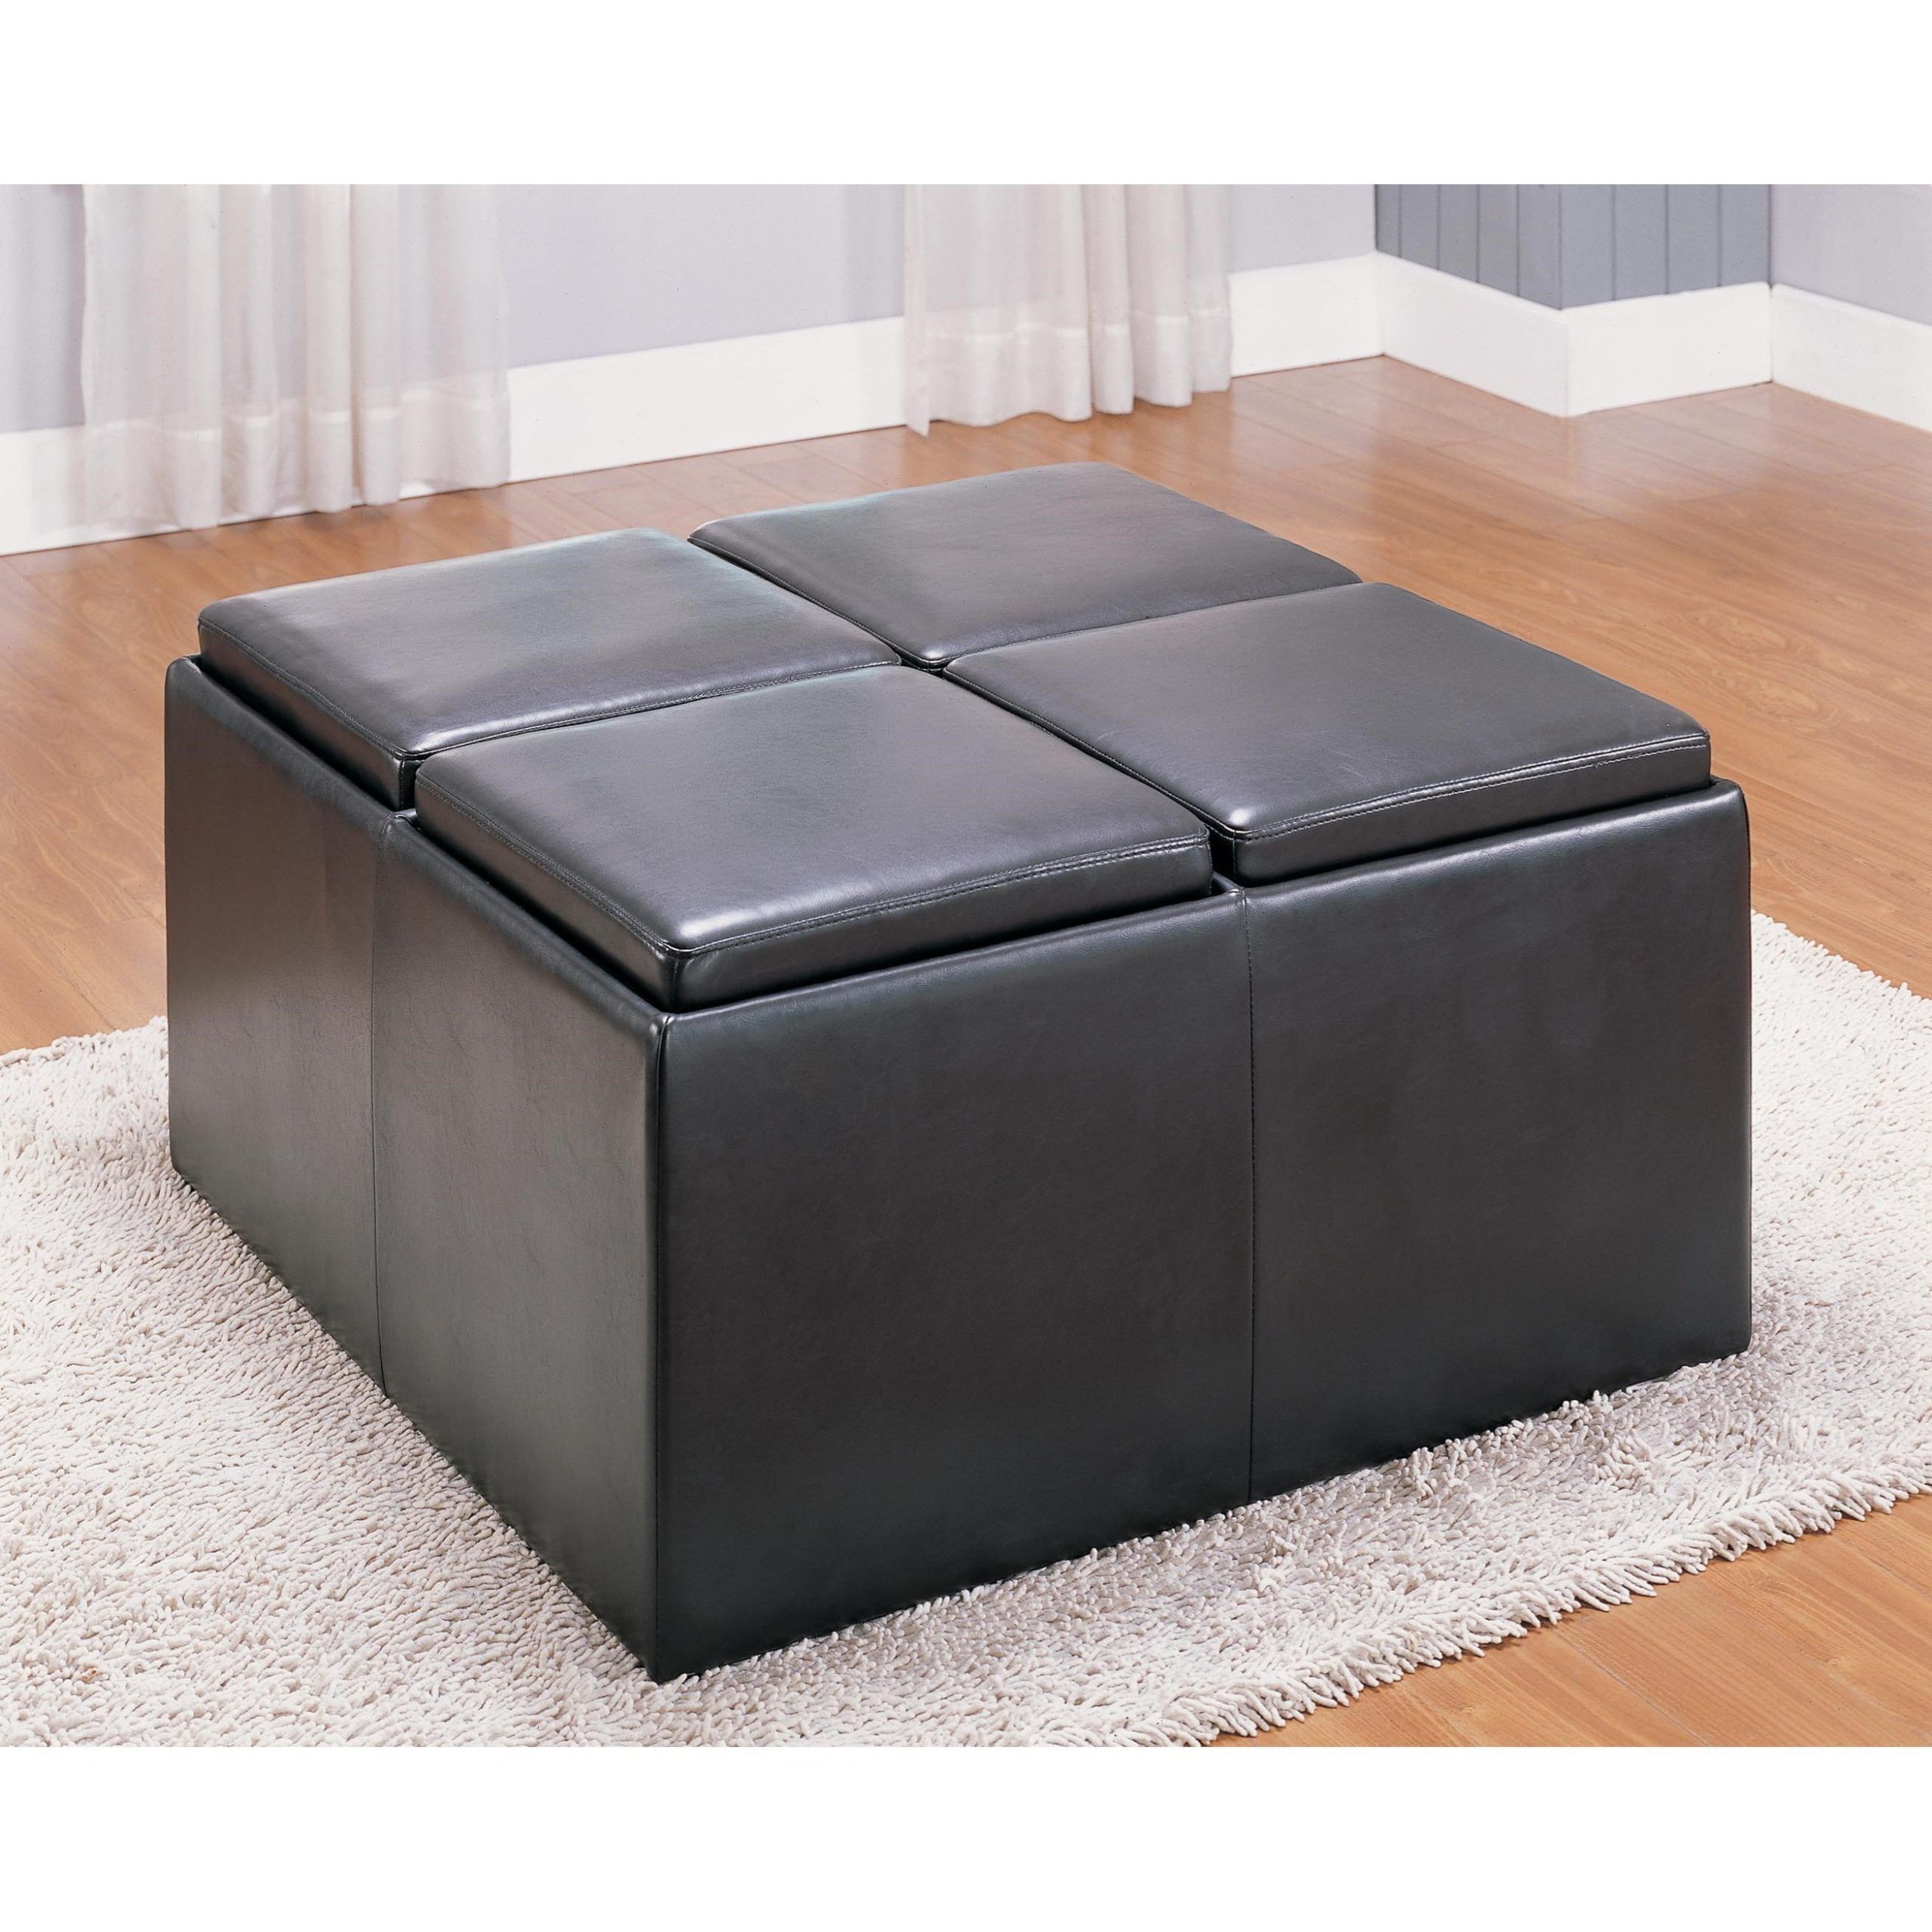 Homelegance Ottomans Casual Ottoman With Reversible Trays And Hidden Stools  | A1 Furniture & Mattress | Ottomans Within Ottomans With Reversible Tray (View 11 of 15)